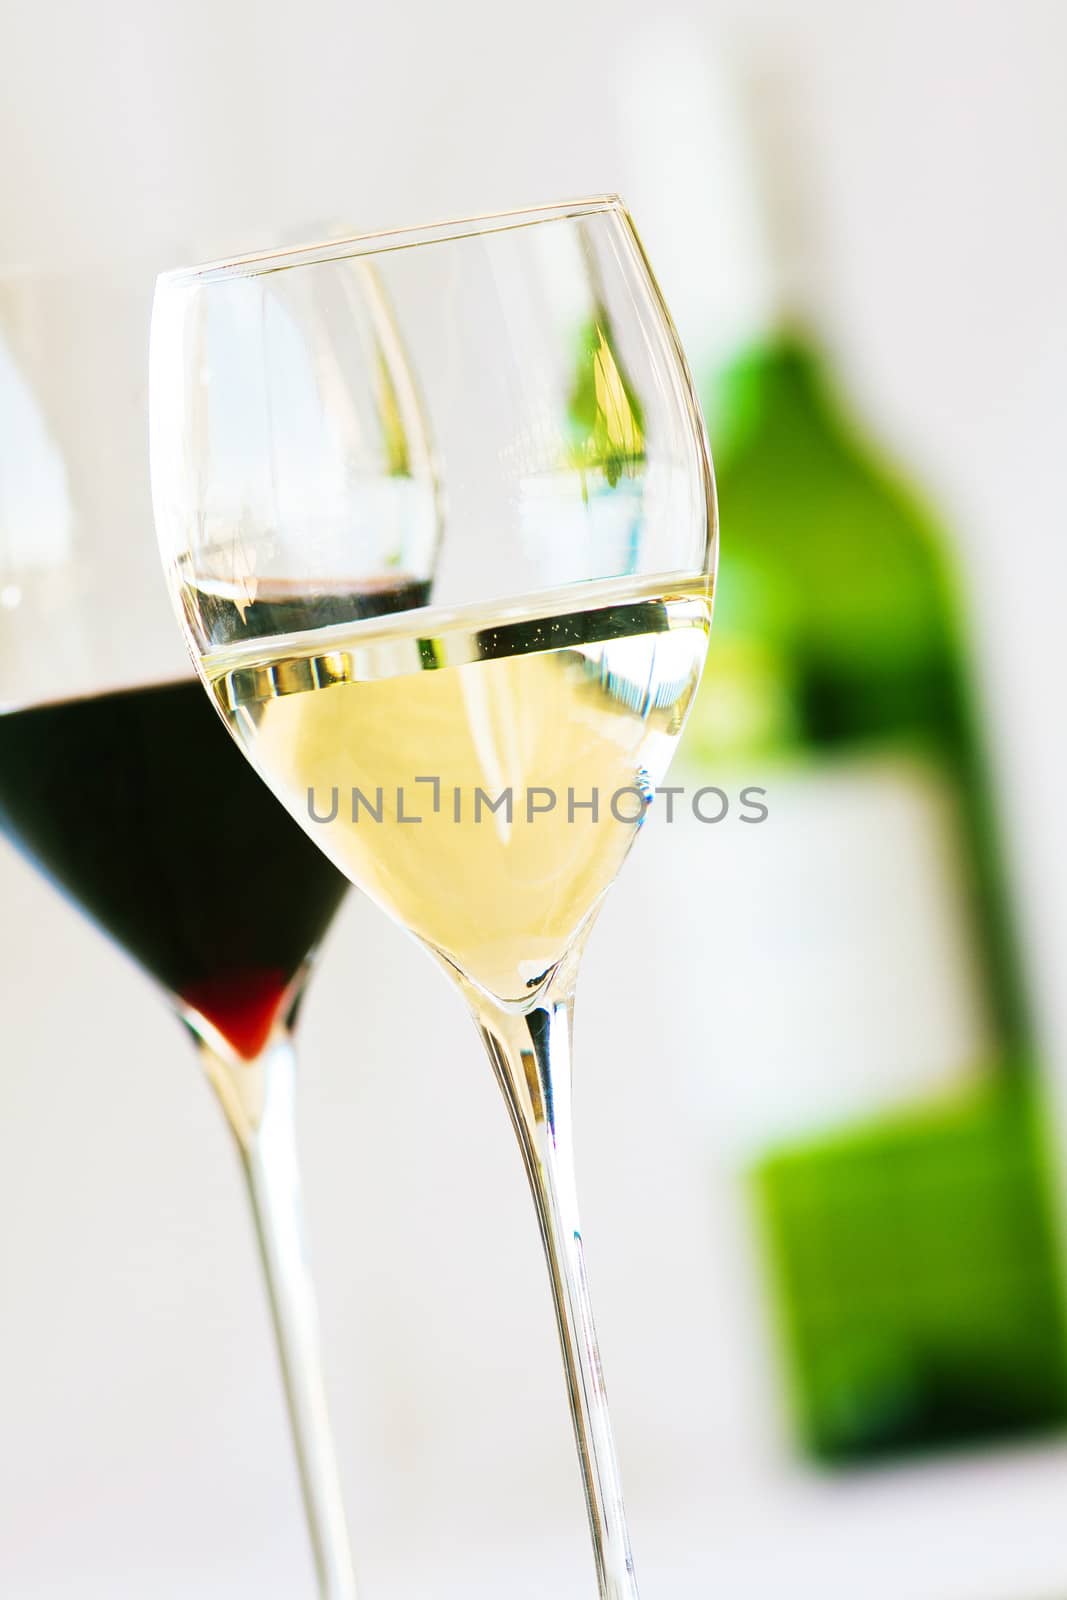 Two glasses of wine, red and white with bottle in the background